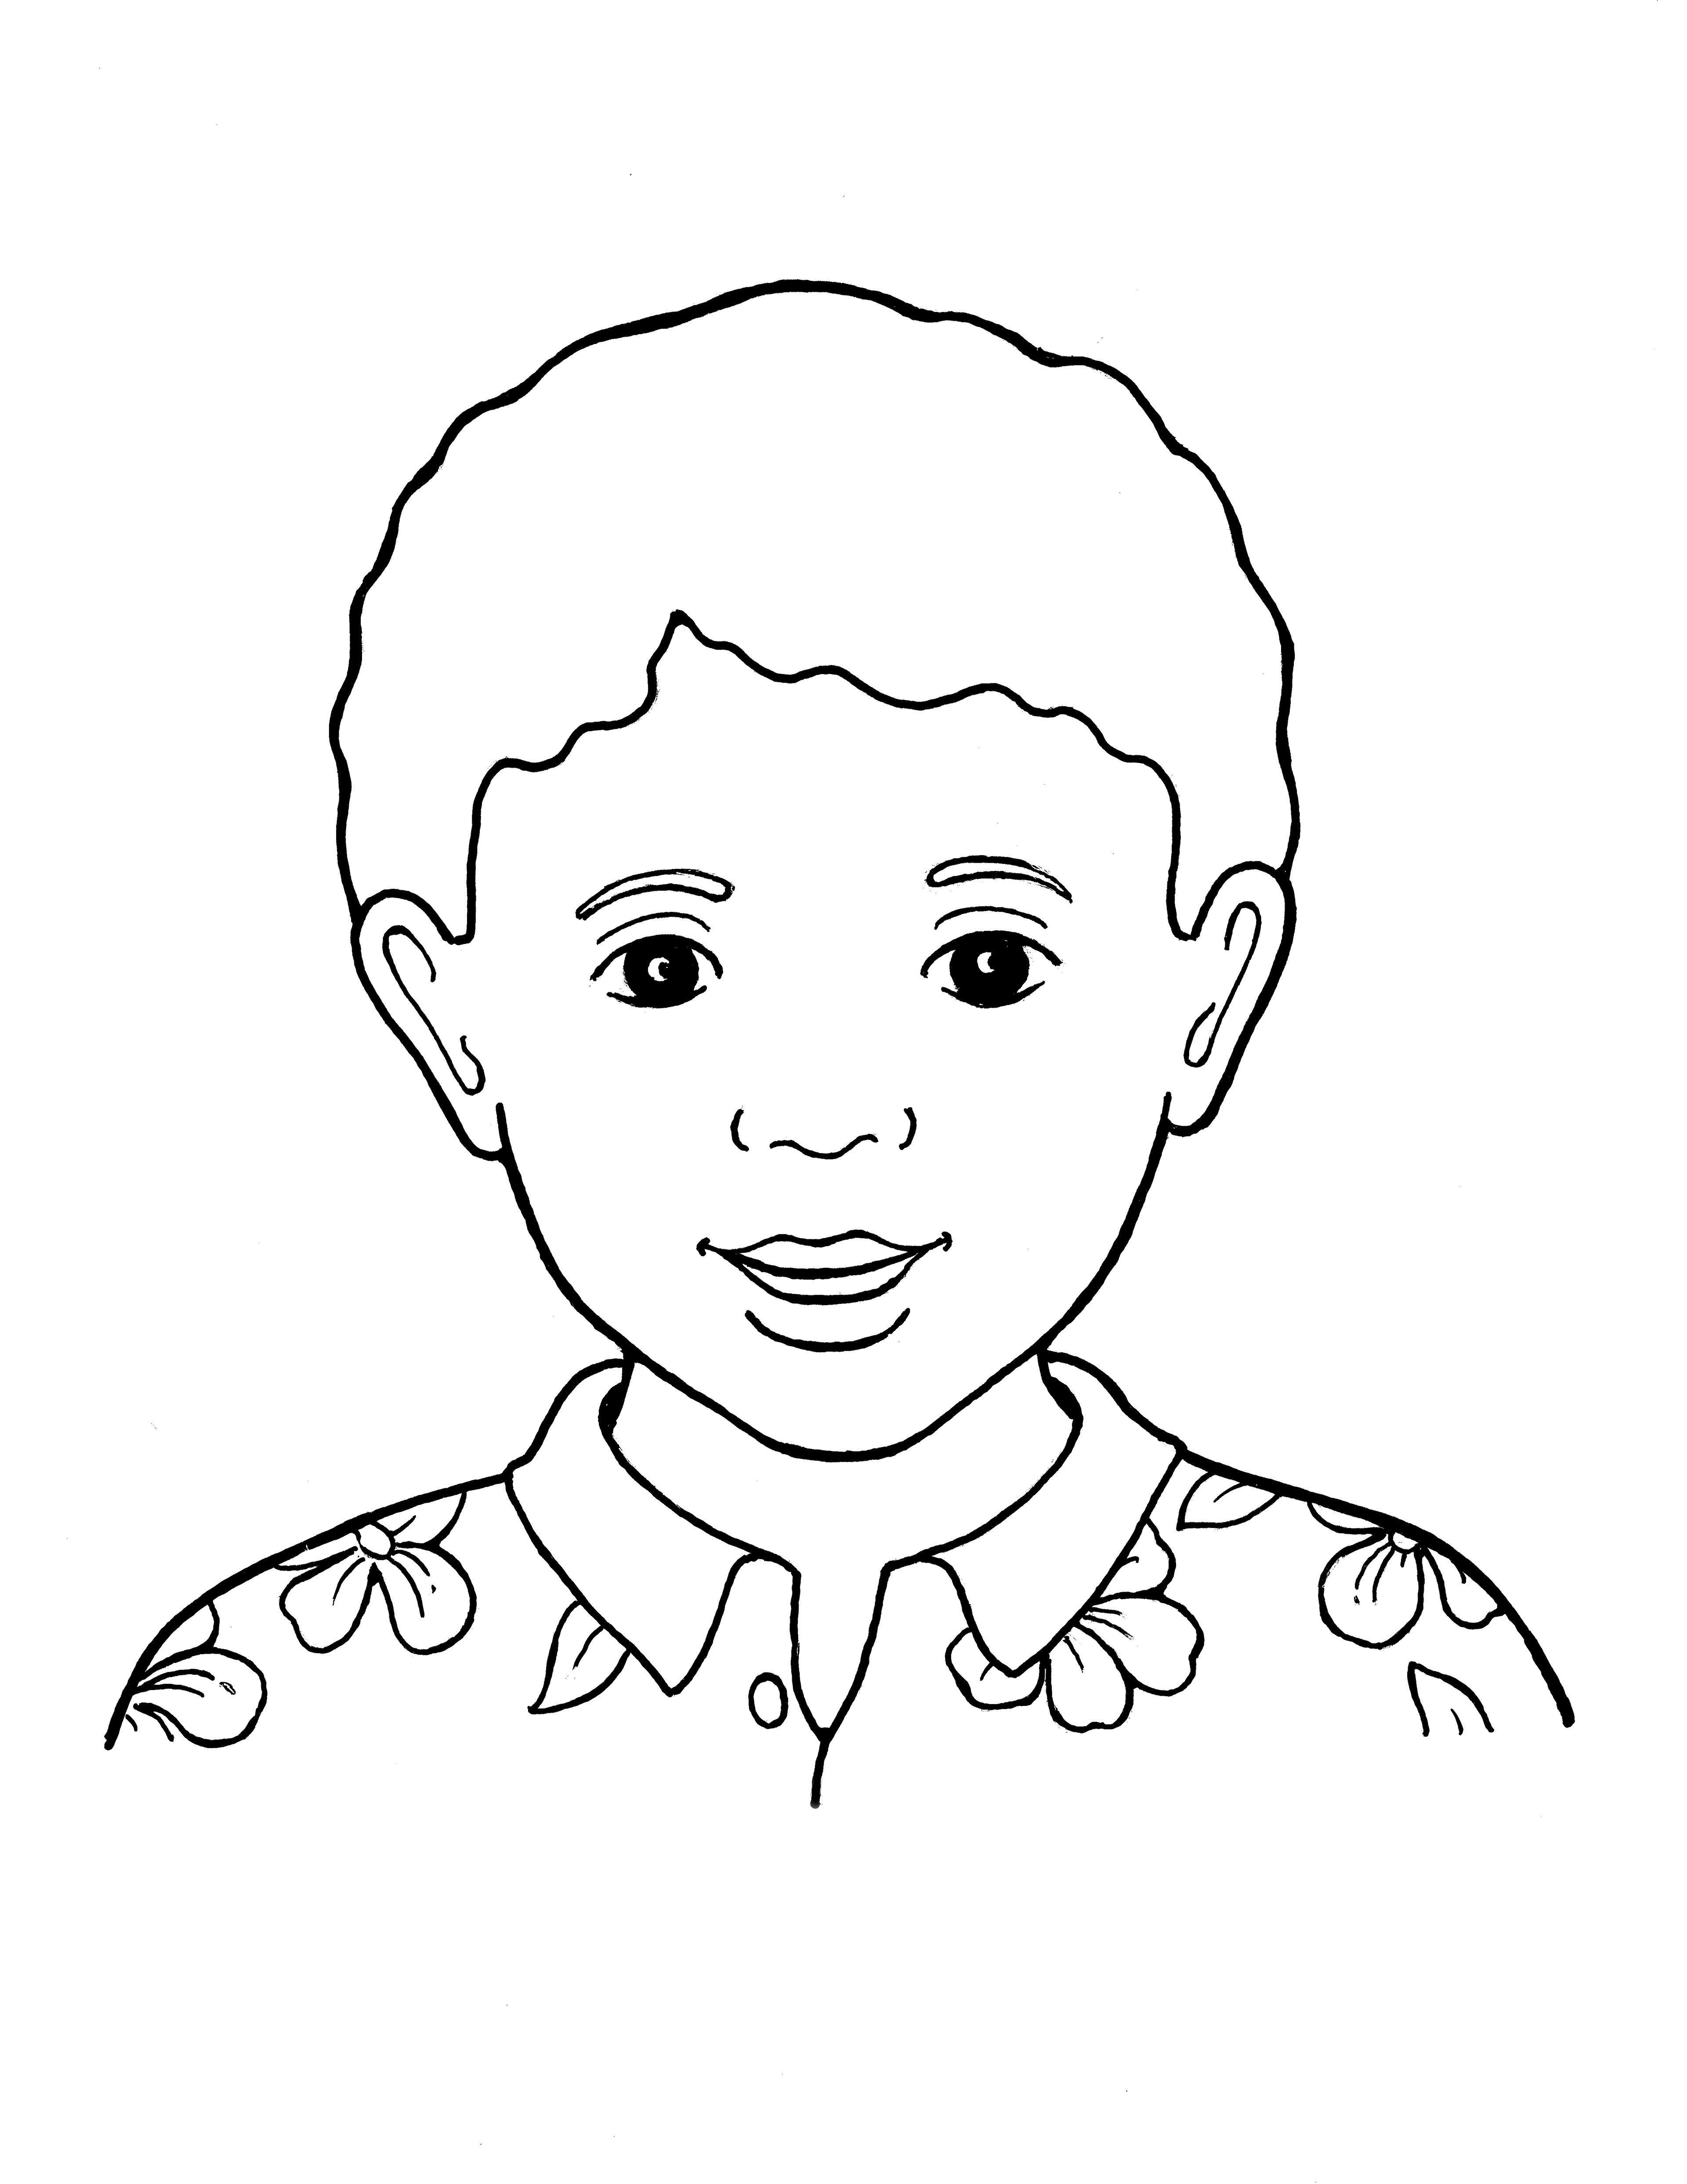 A line drawing of a Primary boy with wavy hair and a decorative shirt.